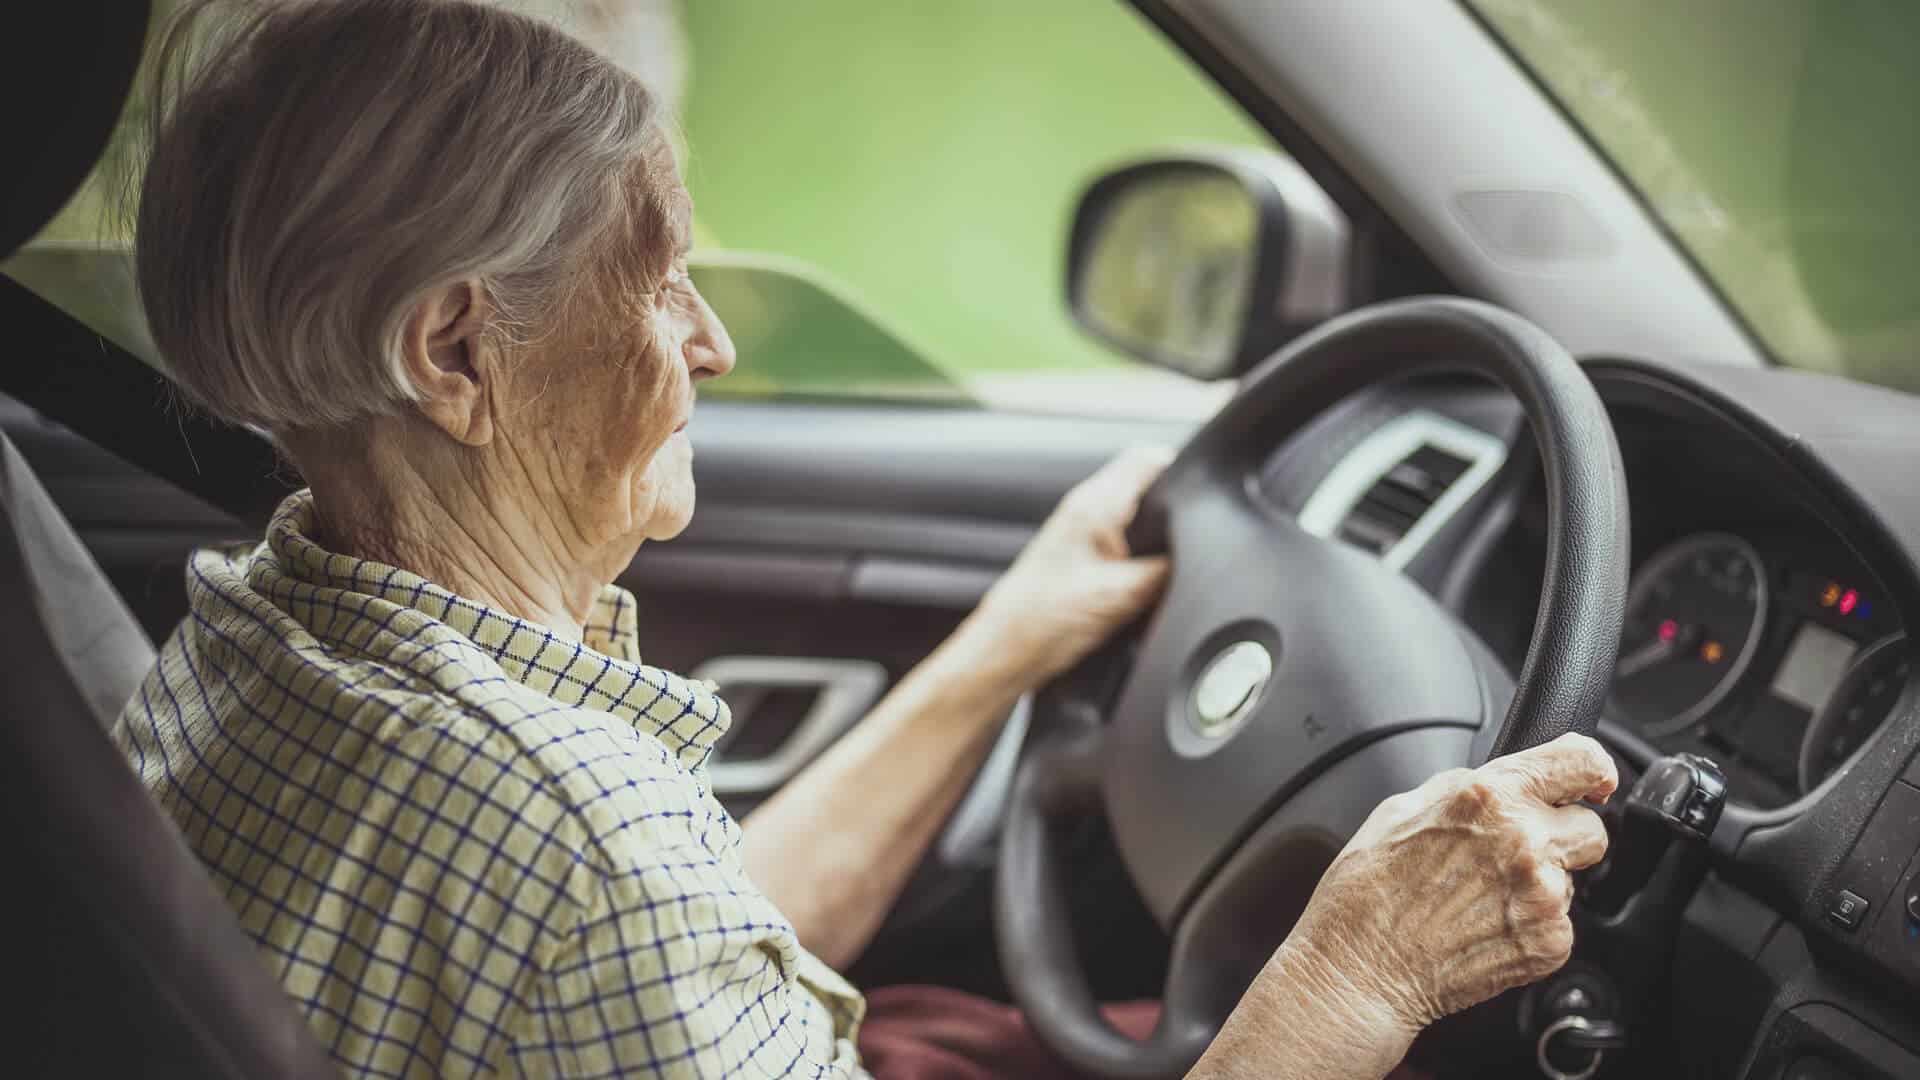 https://www.vitalityseniorliving.com/wp-content/uploads/2019/11/18_What-to-Know-About-Senior-Driver-Safety.jpg